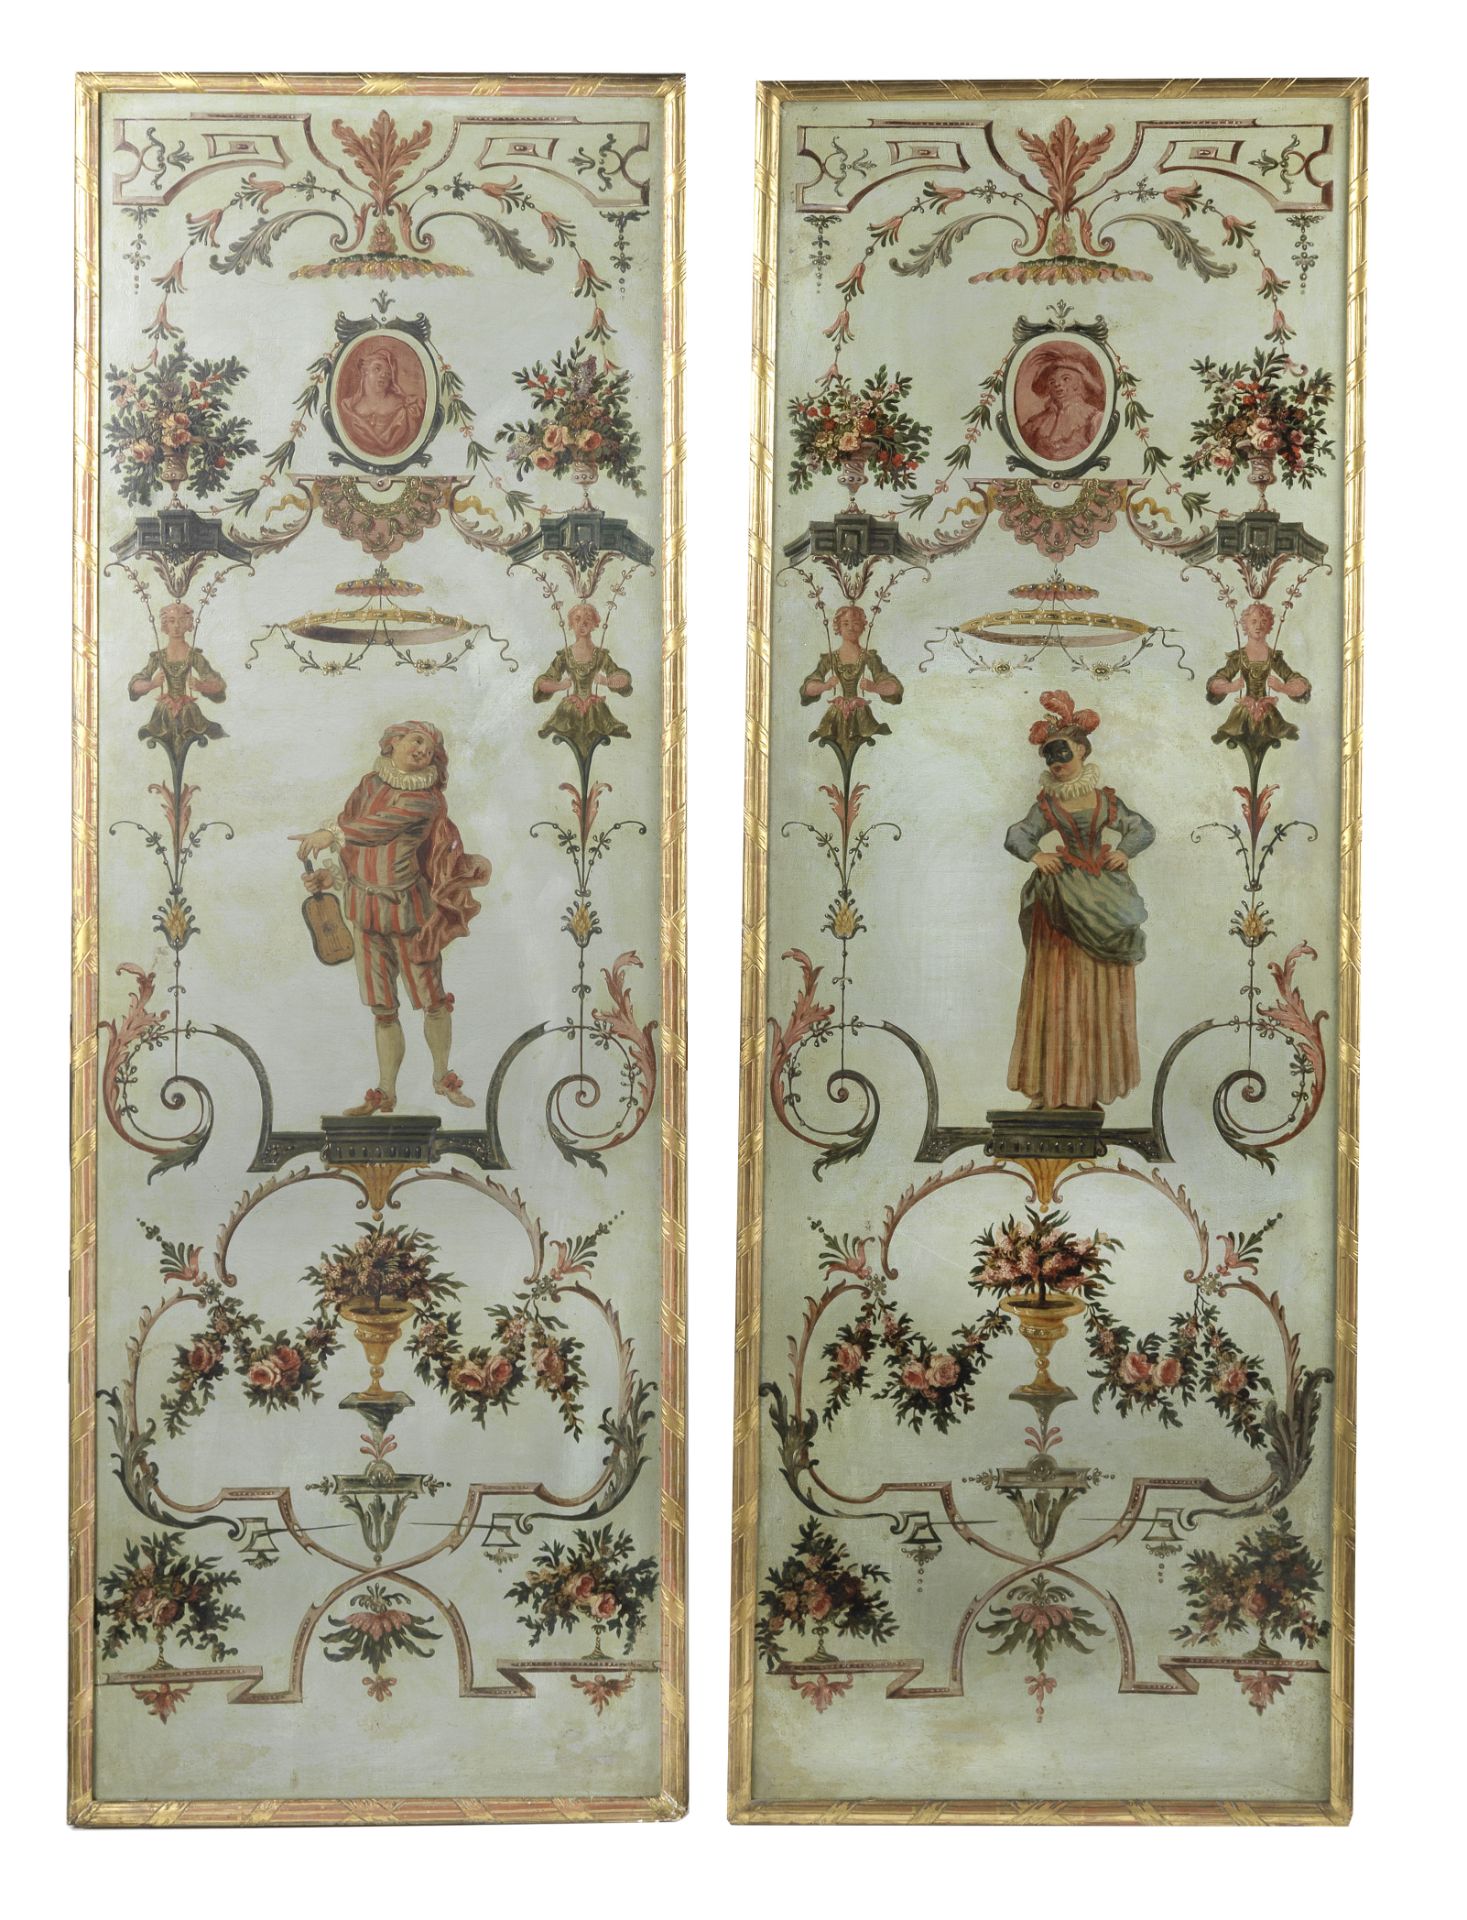 A pair of 19th century Italian decorative painted canvas panels in the 18th century taste, possi...